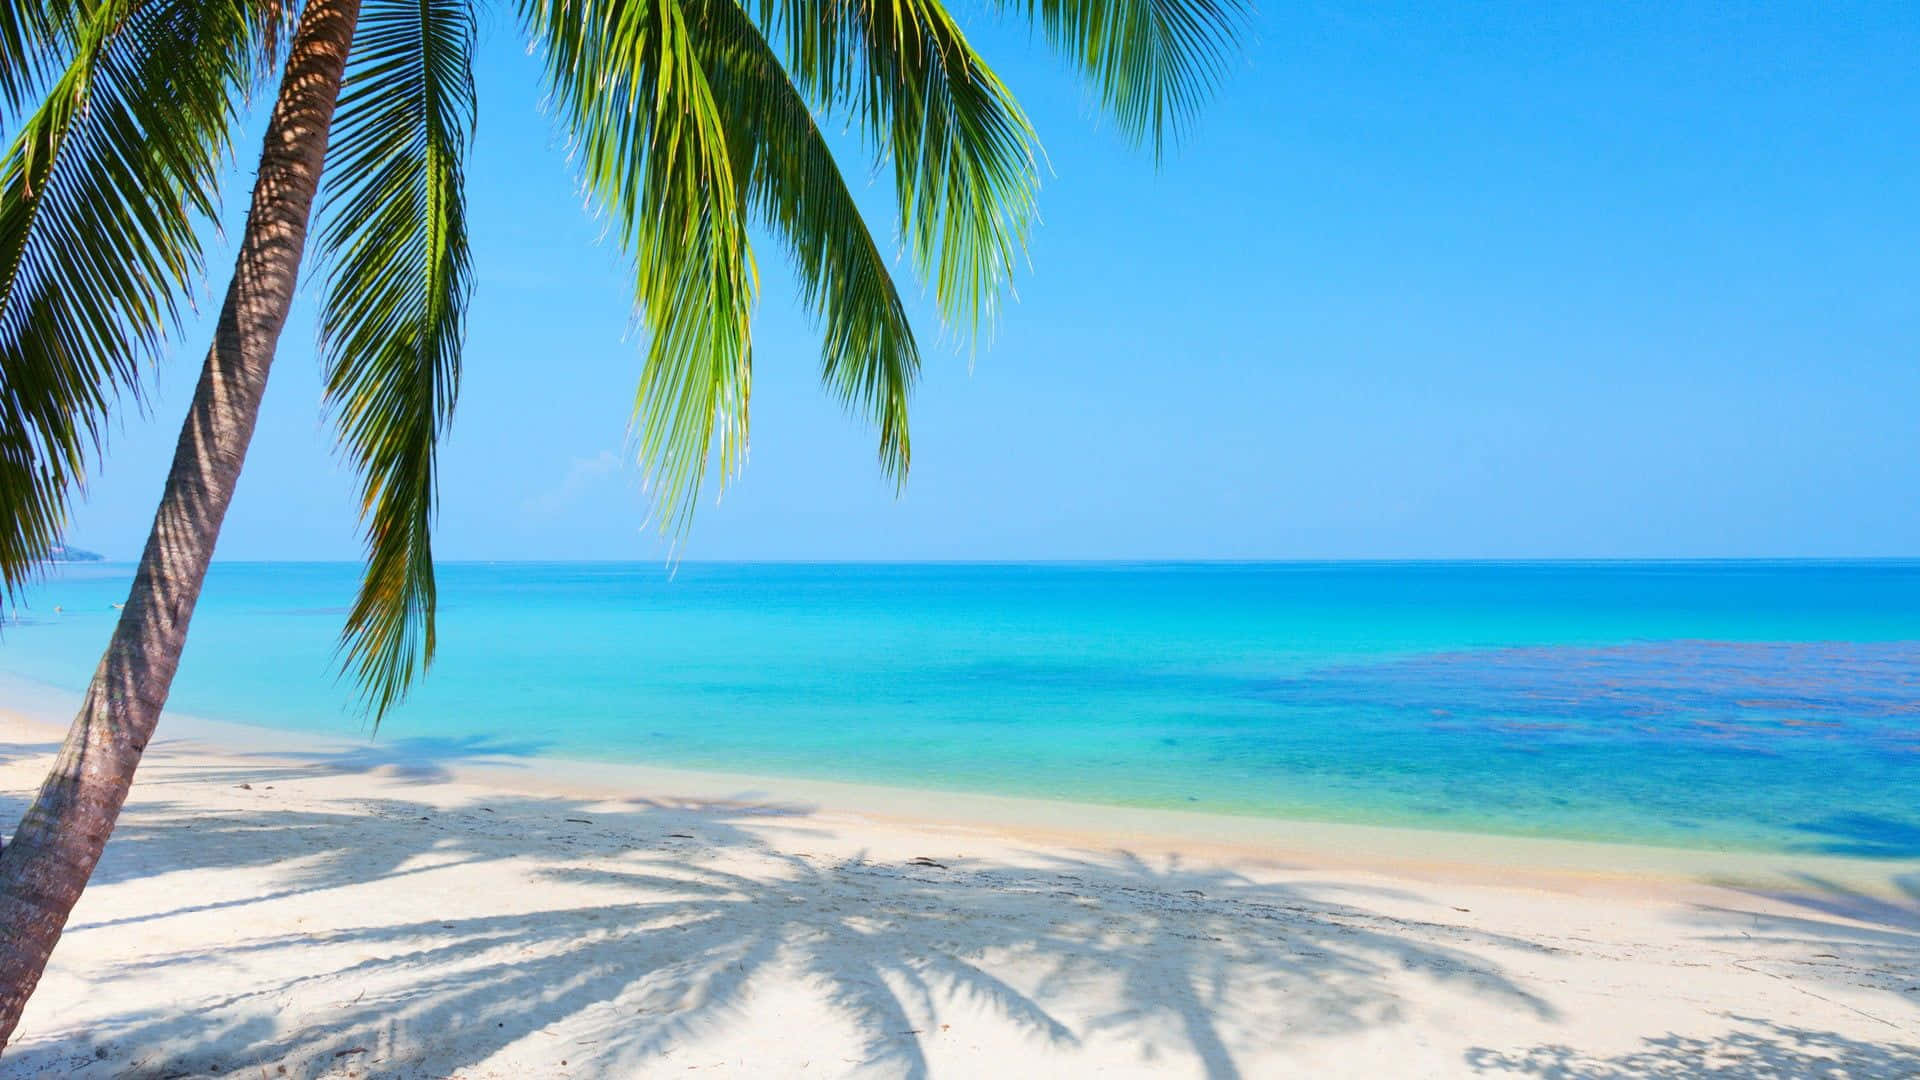 A Beach With Palm Trees And Blue Water Wallpaper